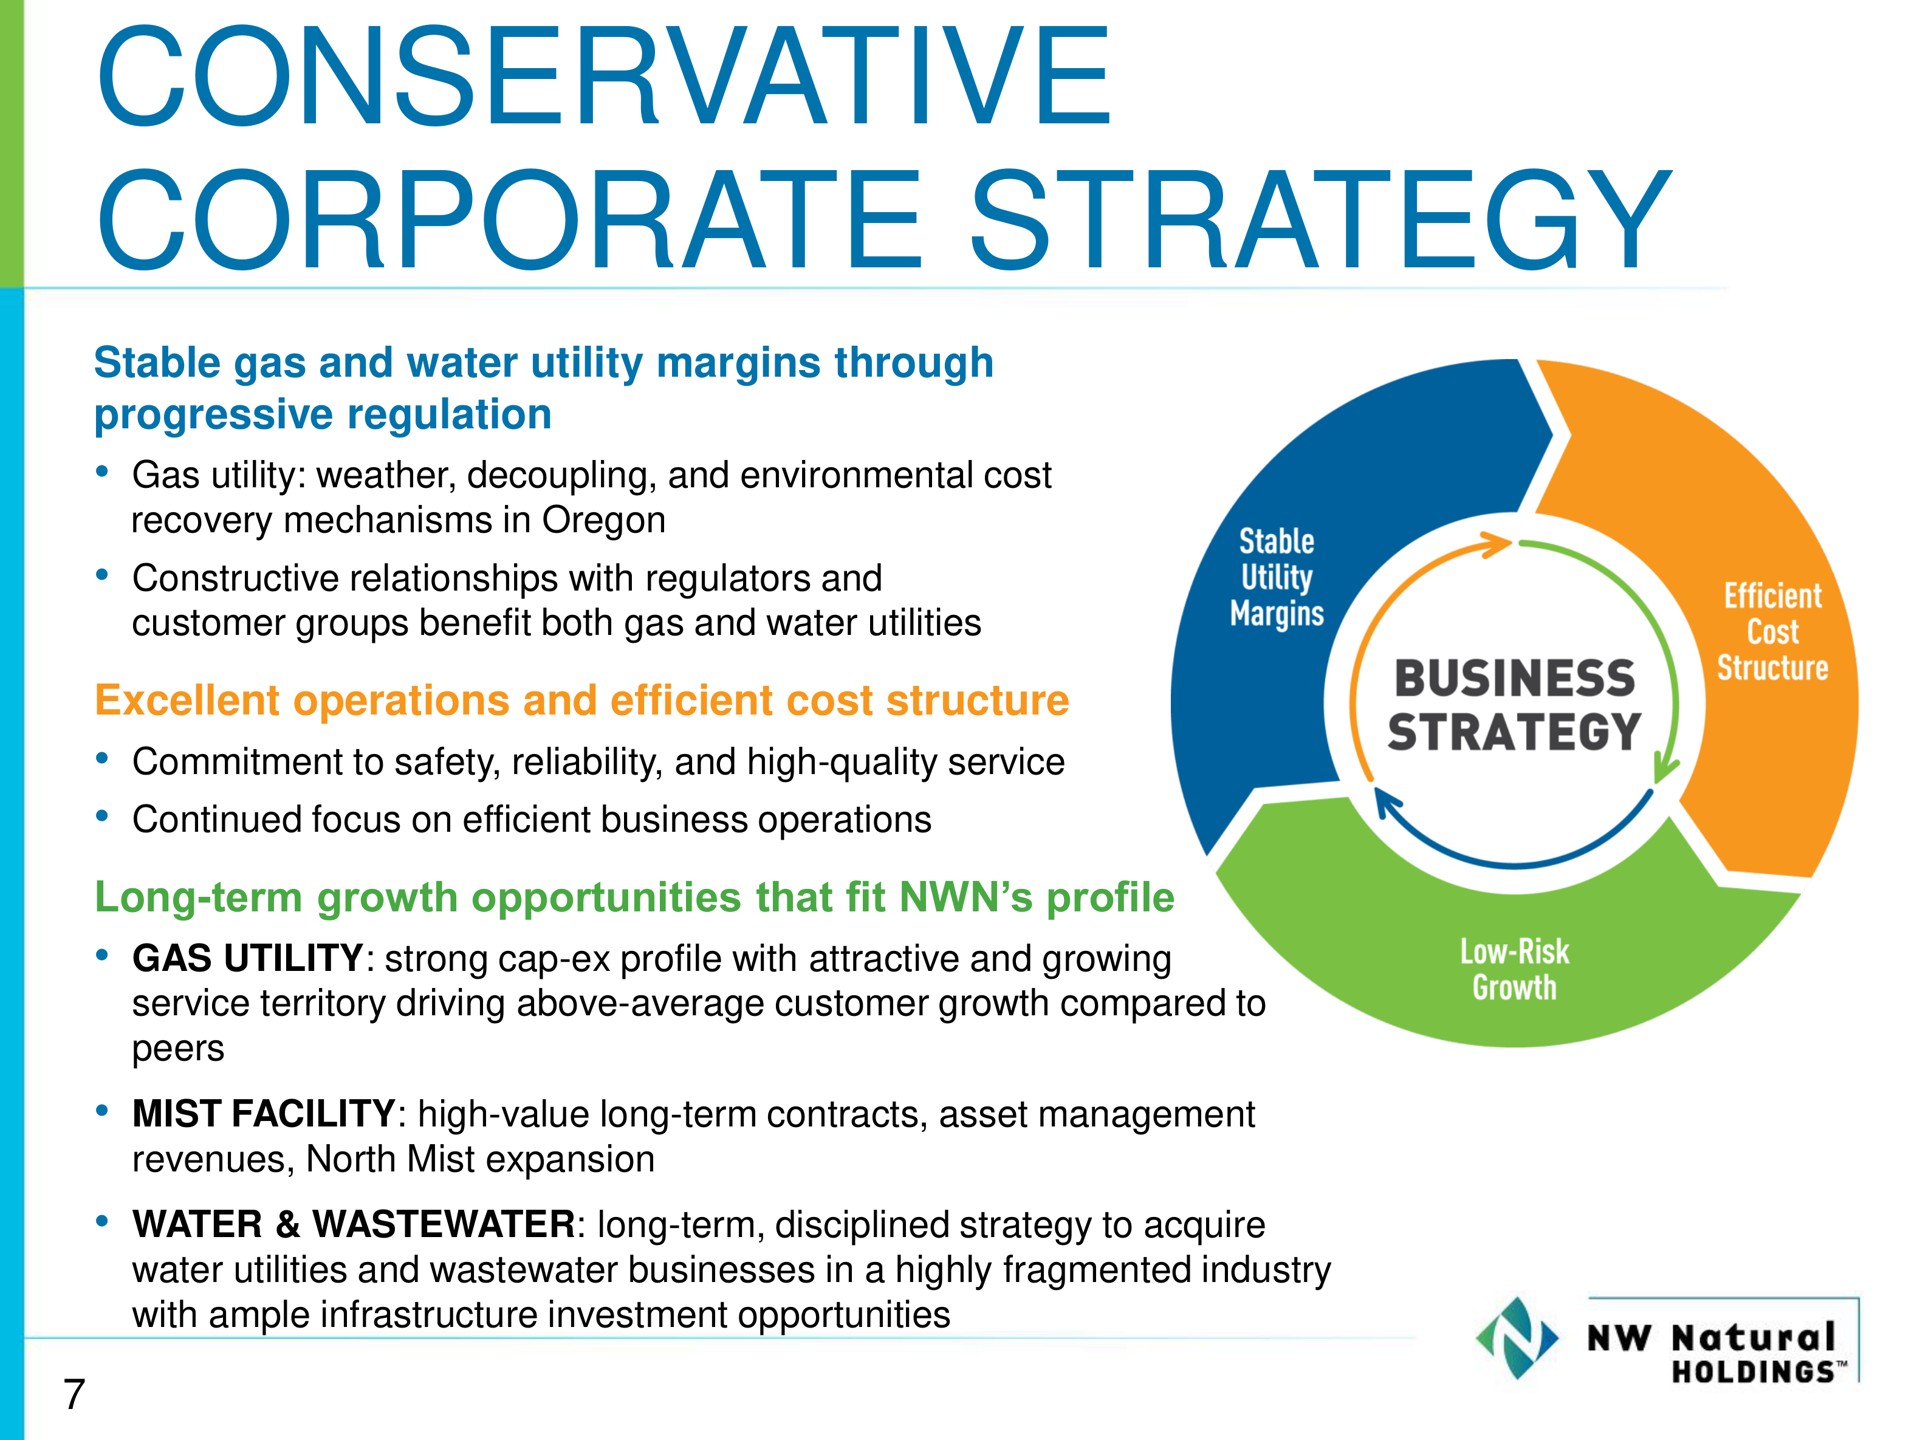 conservative corporate strategy | NW Natural Holdings